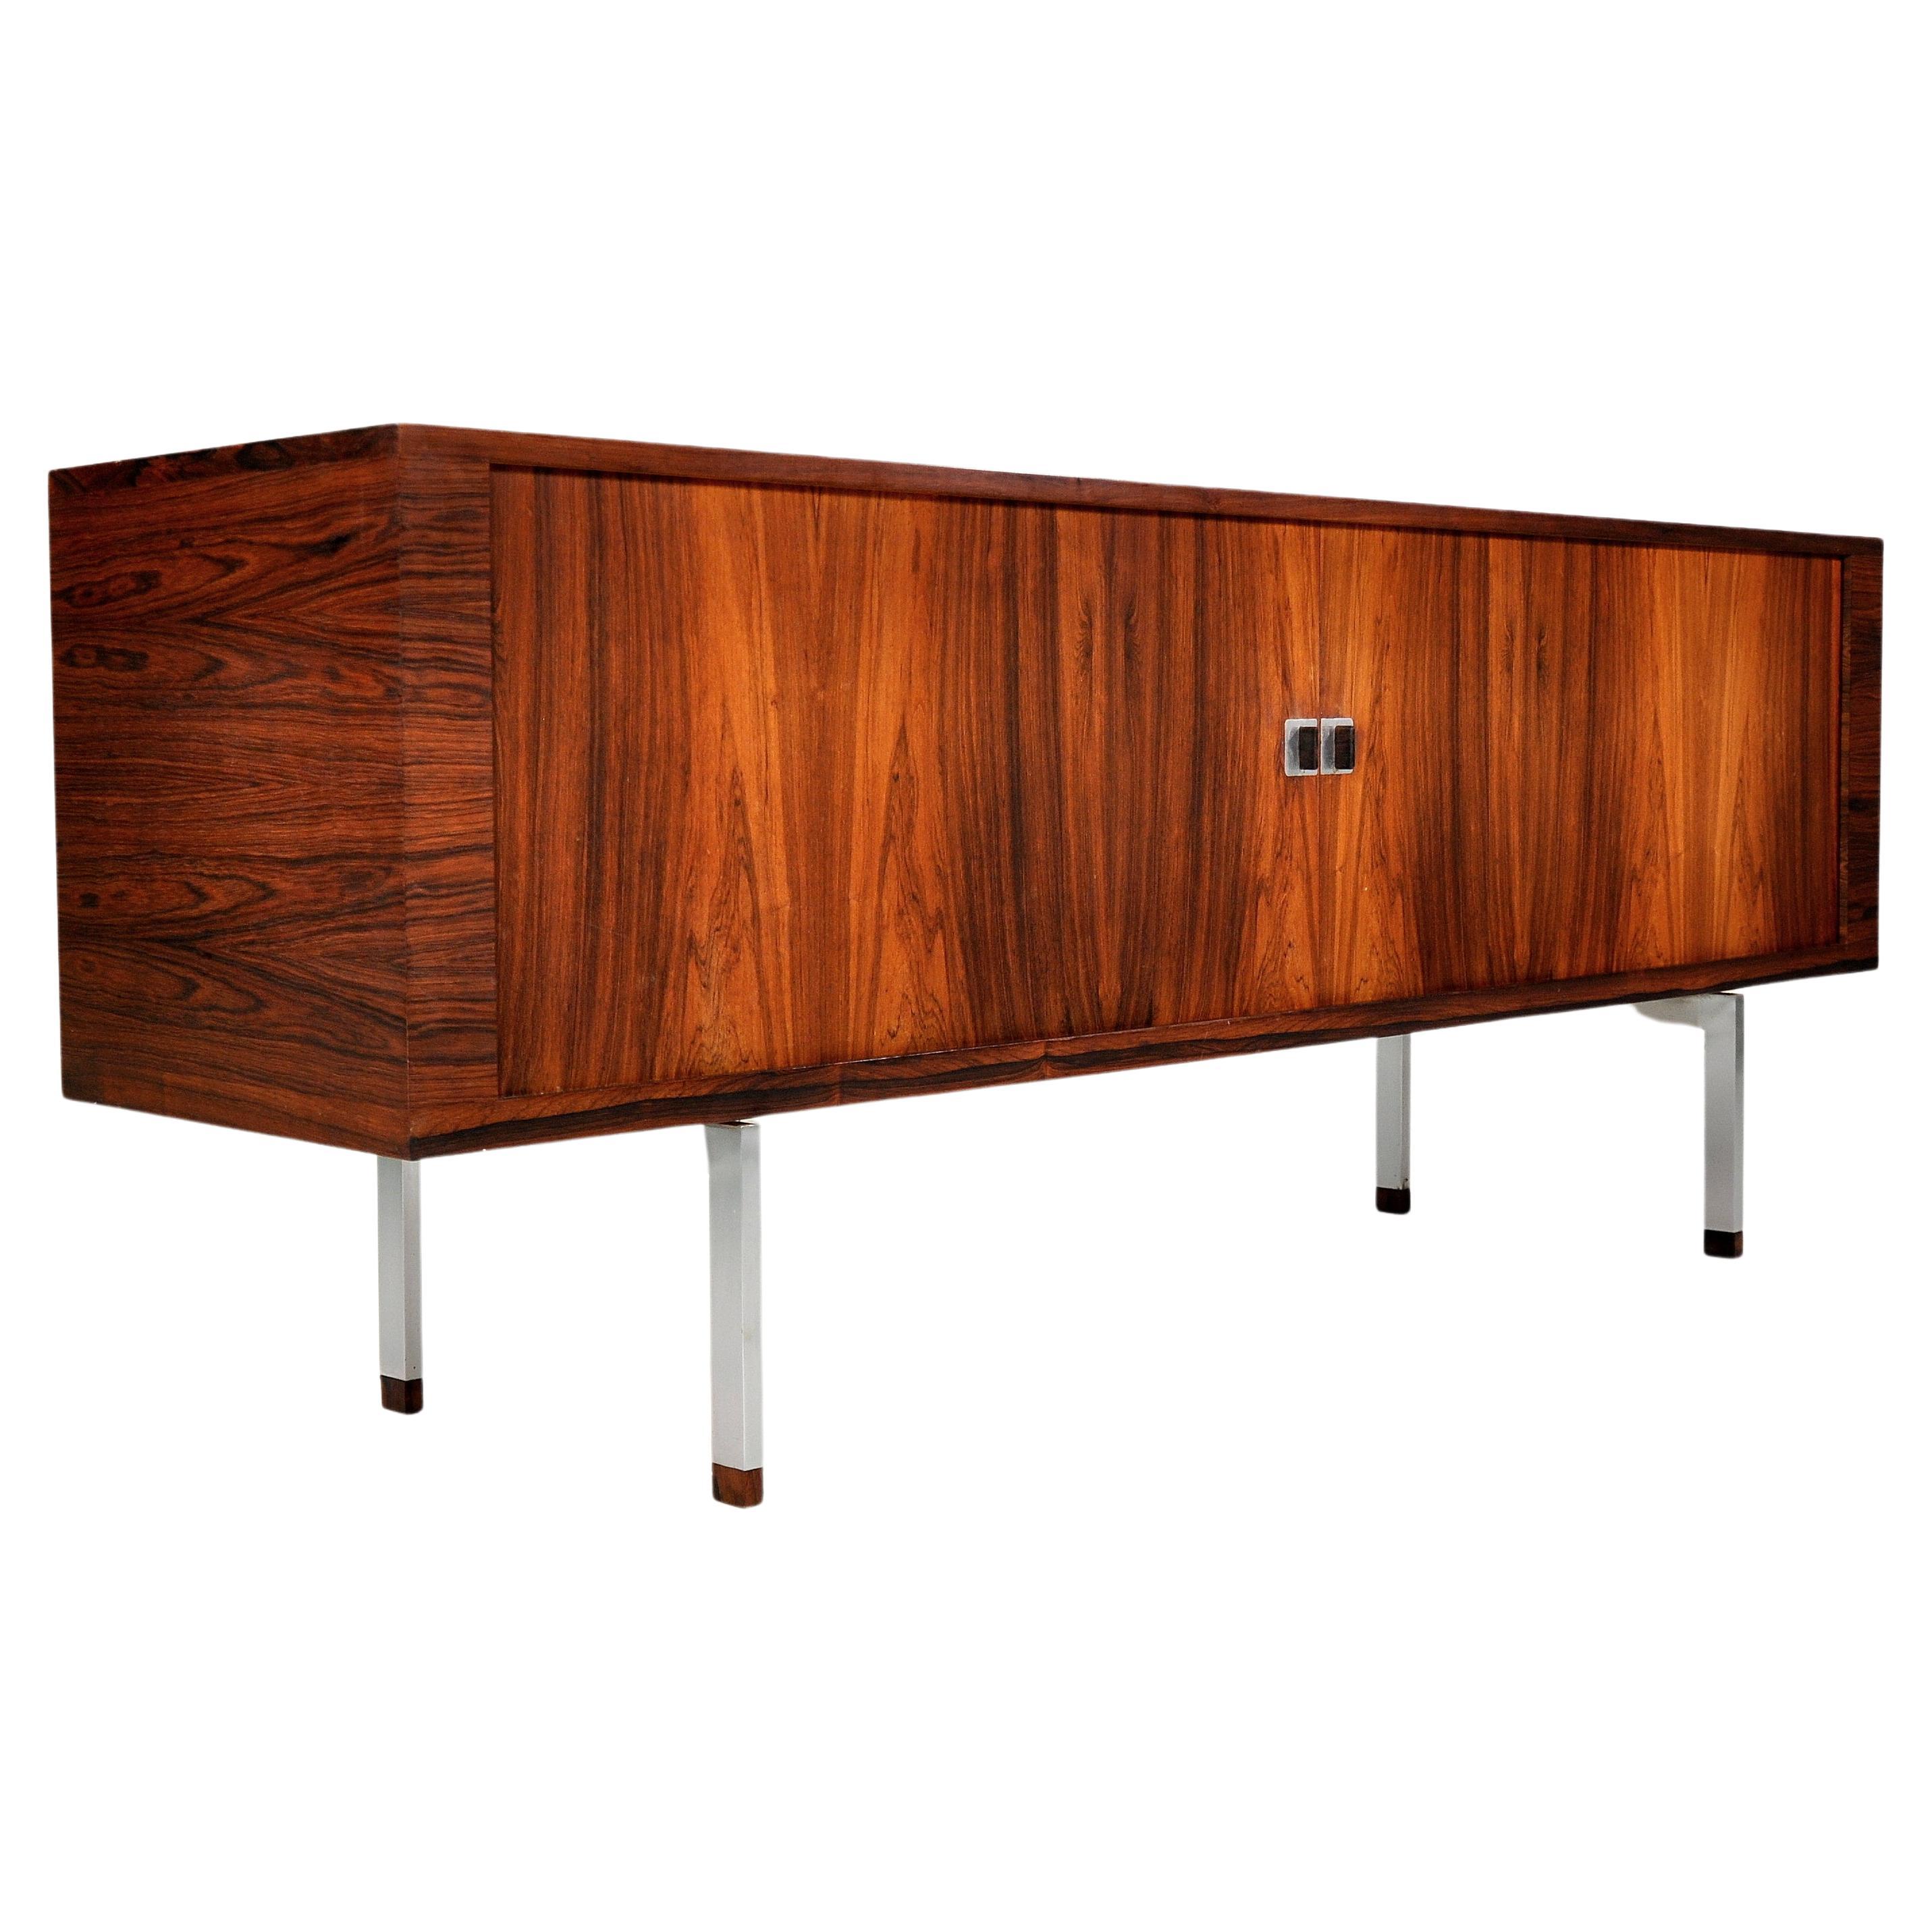 Hans J. Wegner rosewood credenza model RY25 for RY Mobler Denmark.
The rarest and most sophisticated cabinet designed by the master of Danish modern design in Brazilian rosewood and white oak on brushed stainless steel legs. Adjustable drawers and